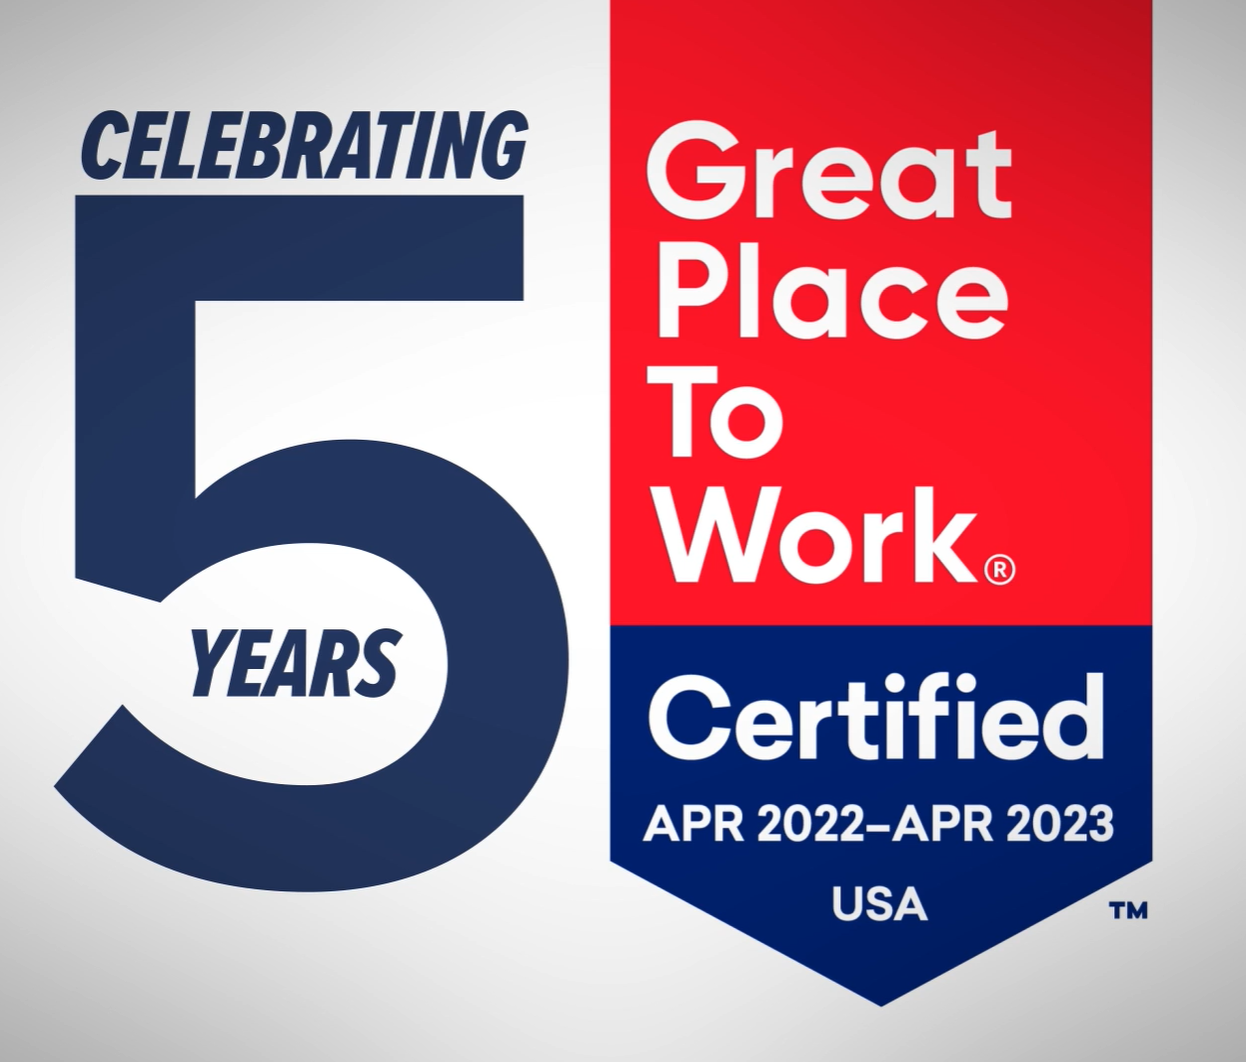 Featured image for “Senior Star Certified as a Great Place to Work® for 5th consecutive year!”